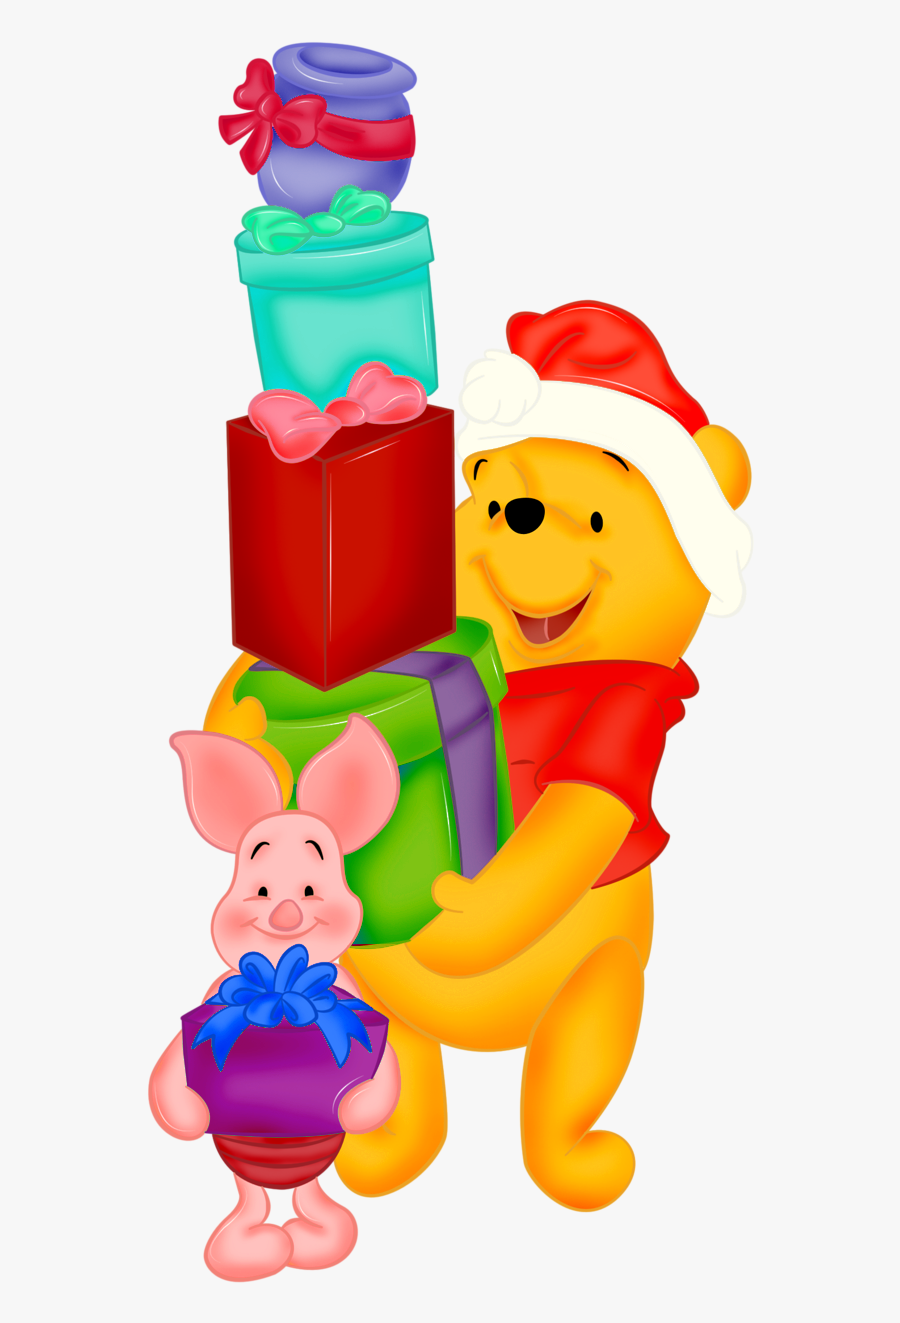 Winnie The Pooh With Presents And Santa Hat - Winnie The Pooh Cartoon Christmas, Transparent Clipart